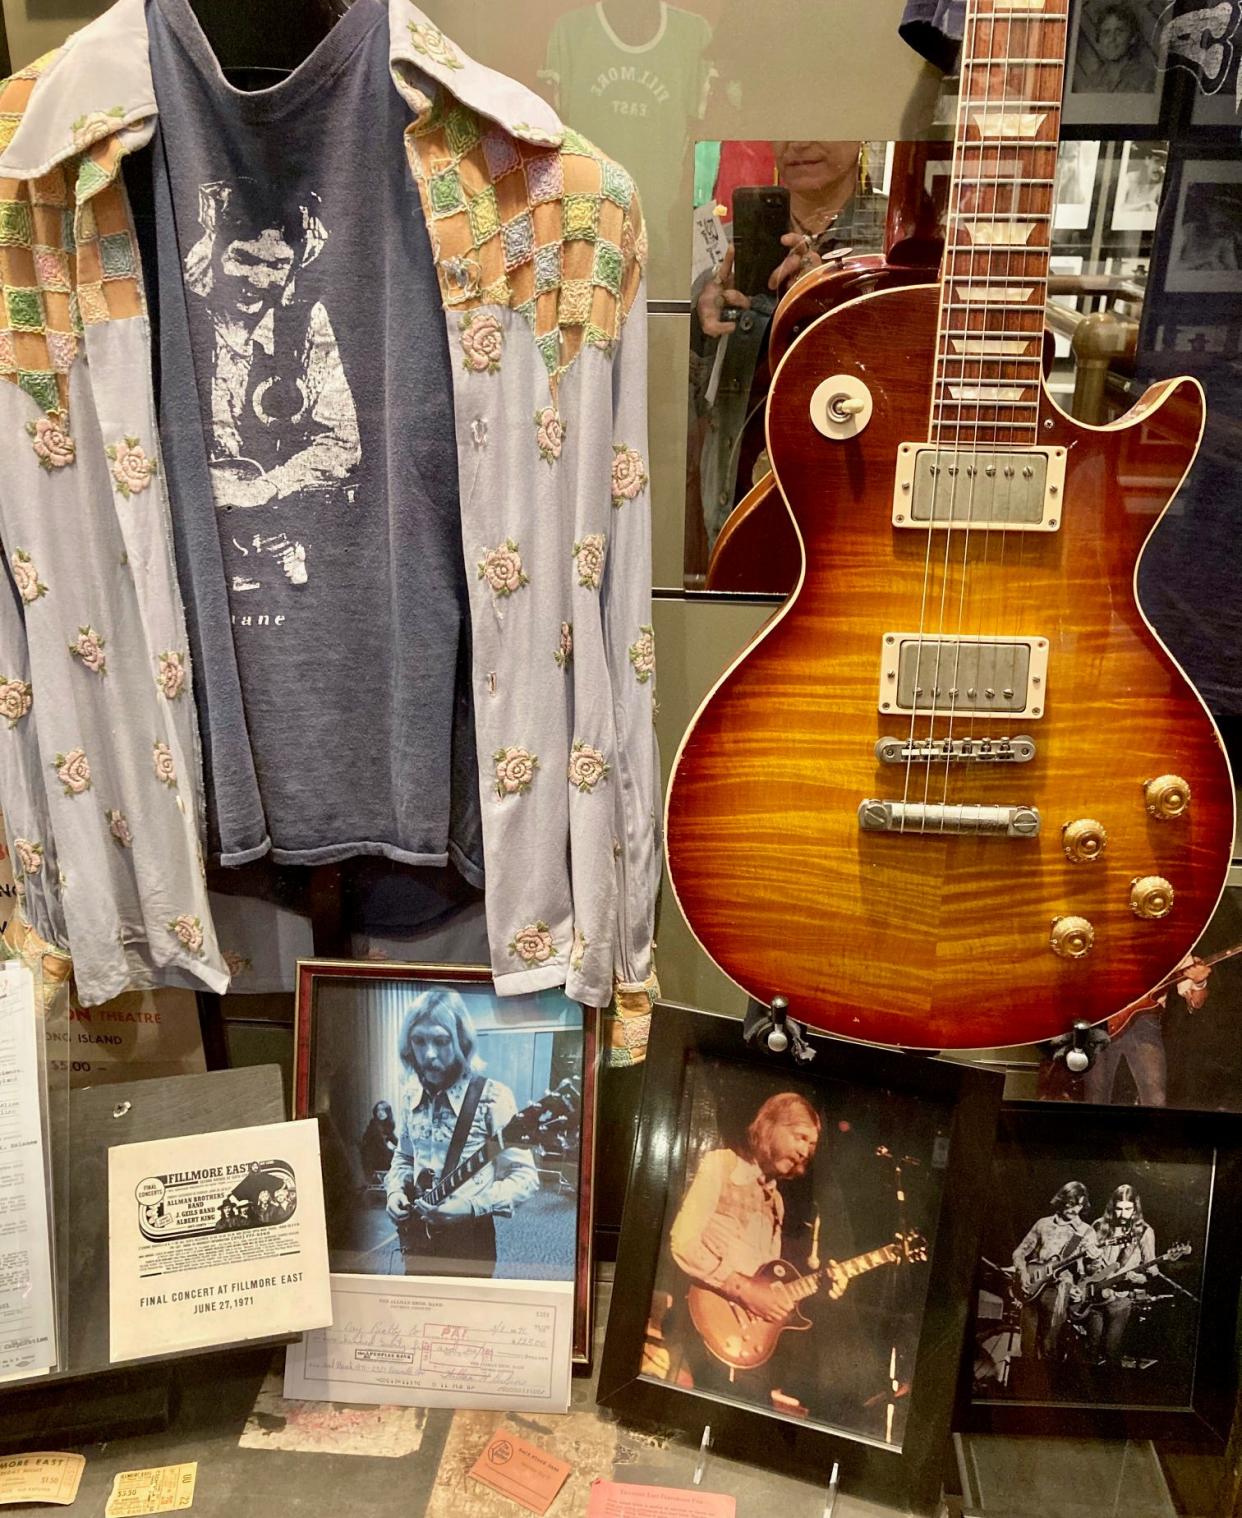 Duane Allman's iconic Western-style shirt alongside his fabled Gibson Les Paul.